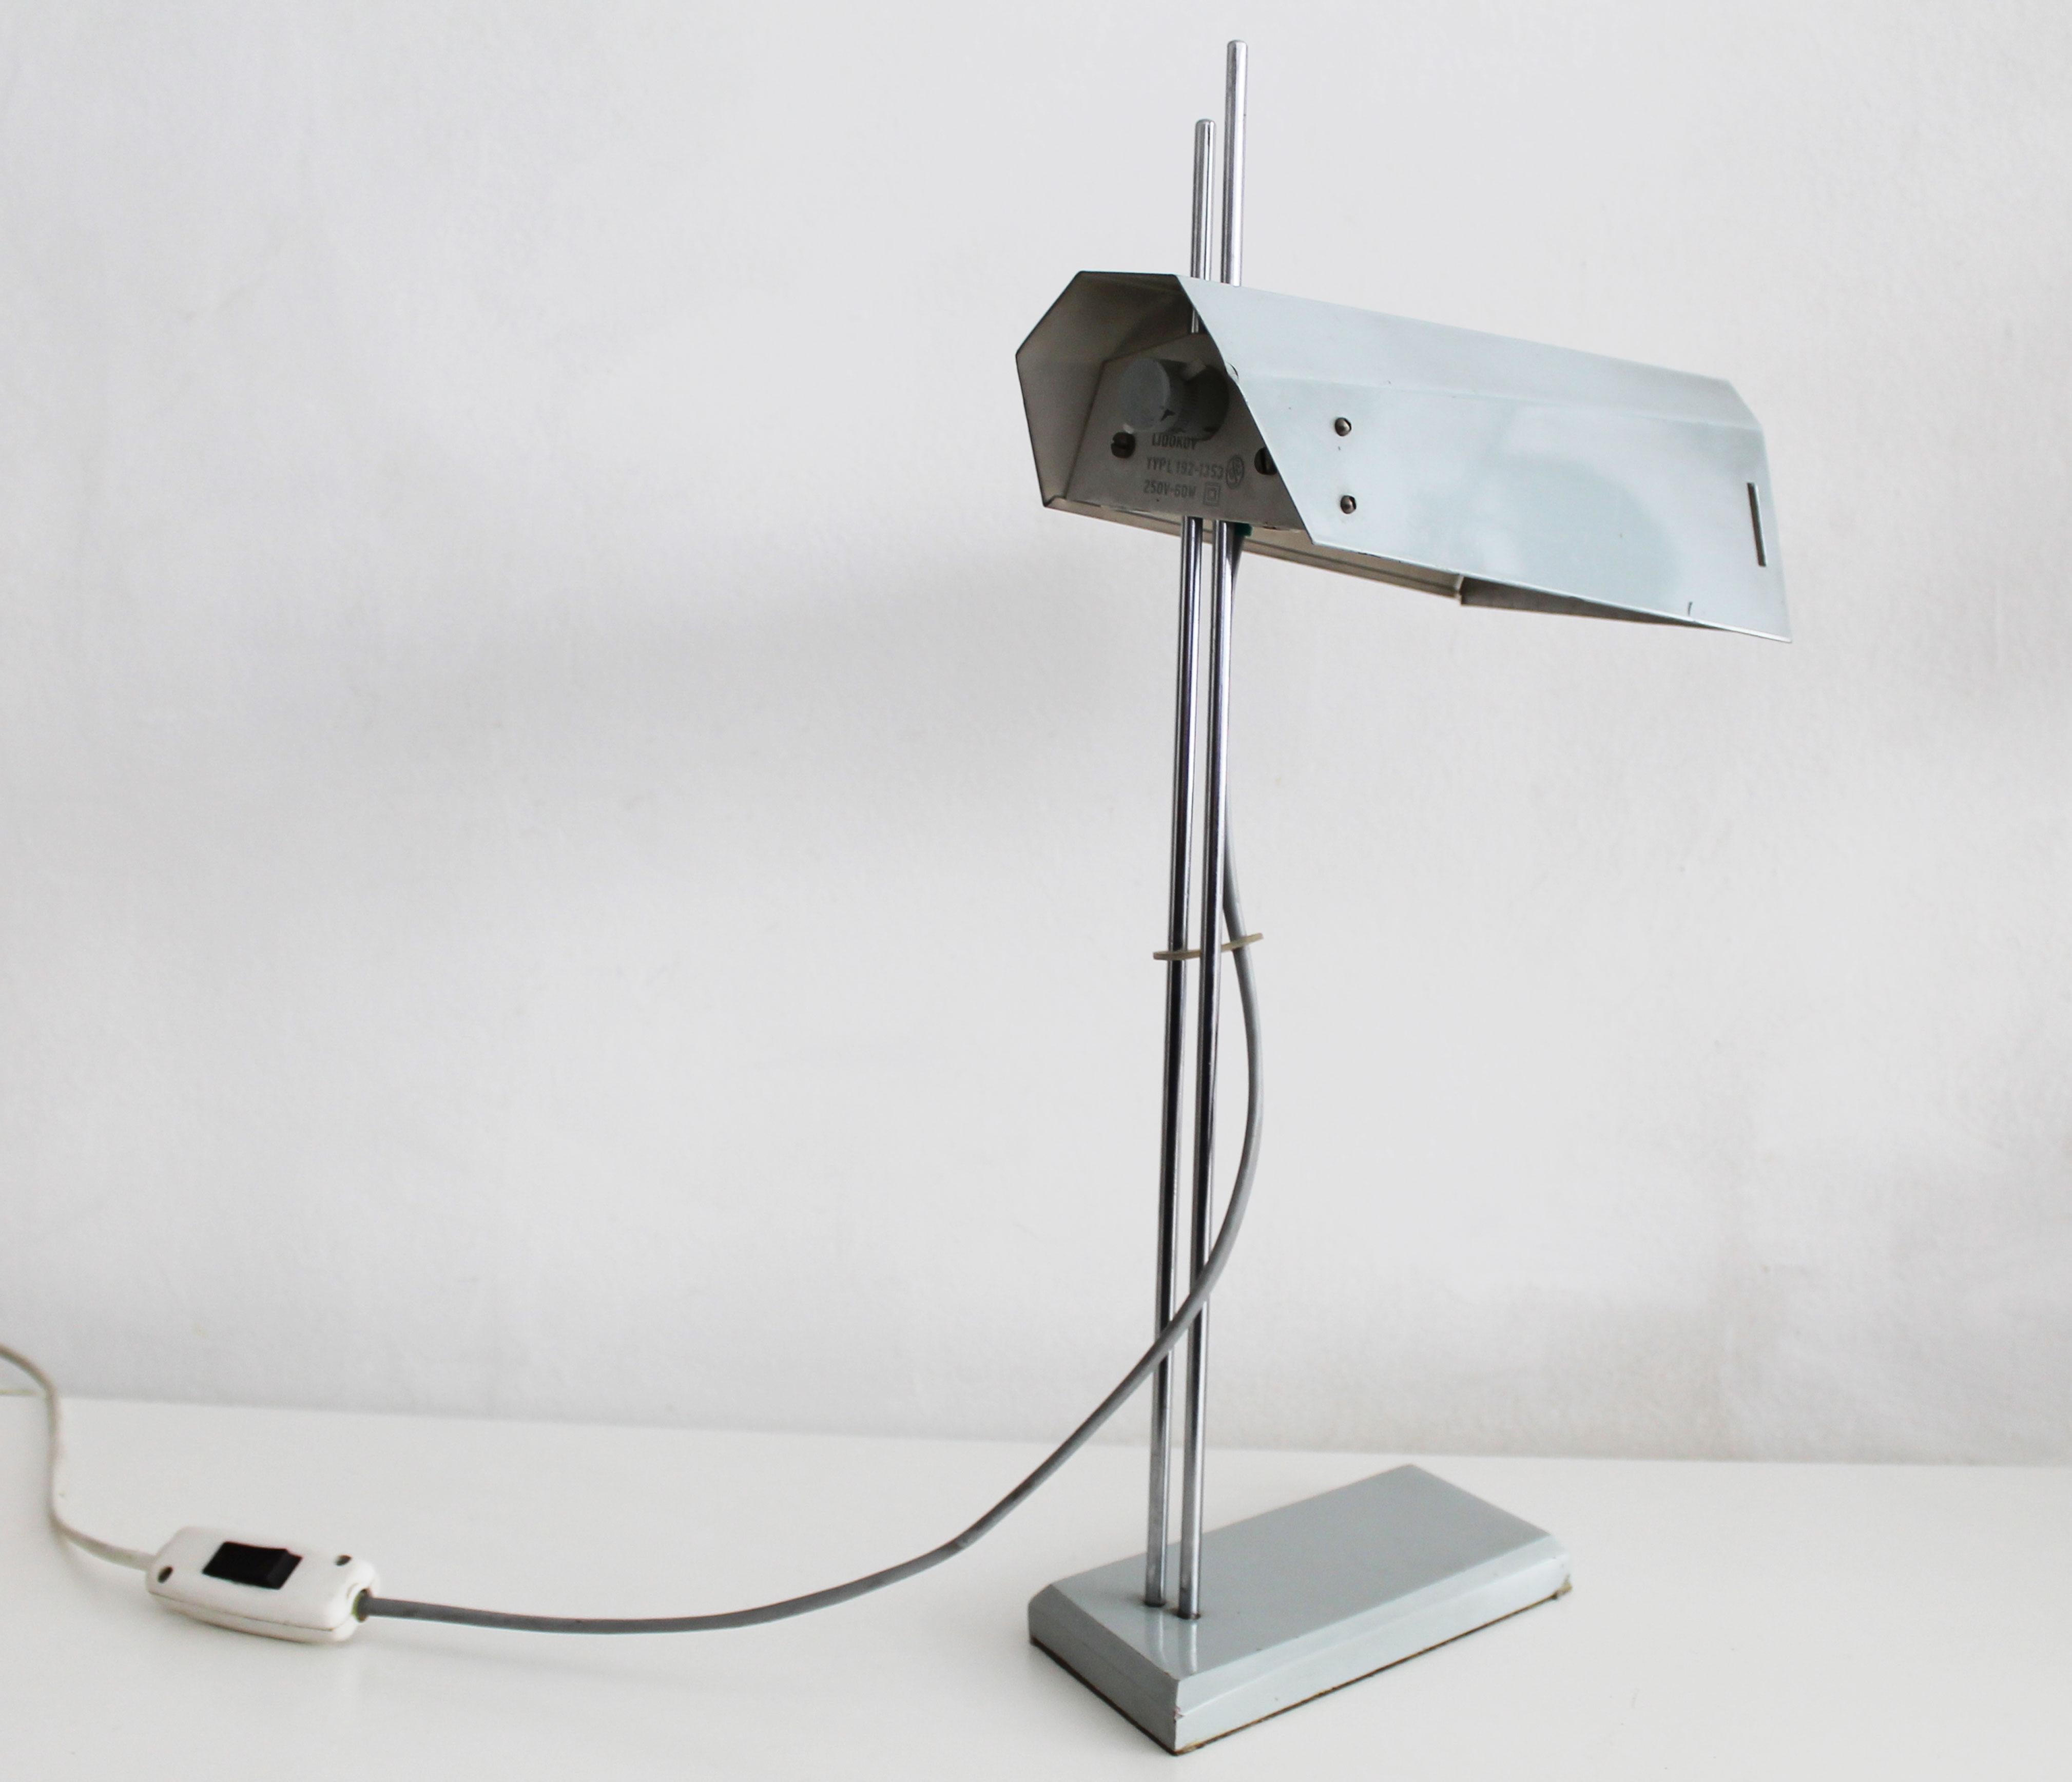 This desk lamp was designed in the late 1970's, and was produced by Lidokov in former Czechoslovakia.

The lampshade is held by two steel rods. This allows the user to adjust the lampshade to different positions. The rods are screwed into round